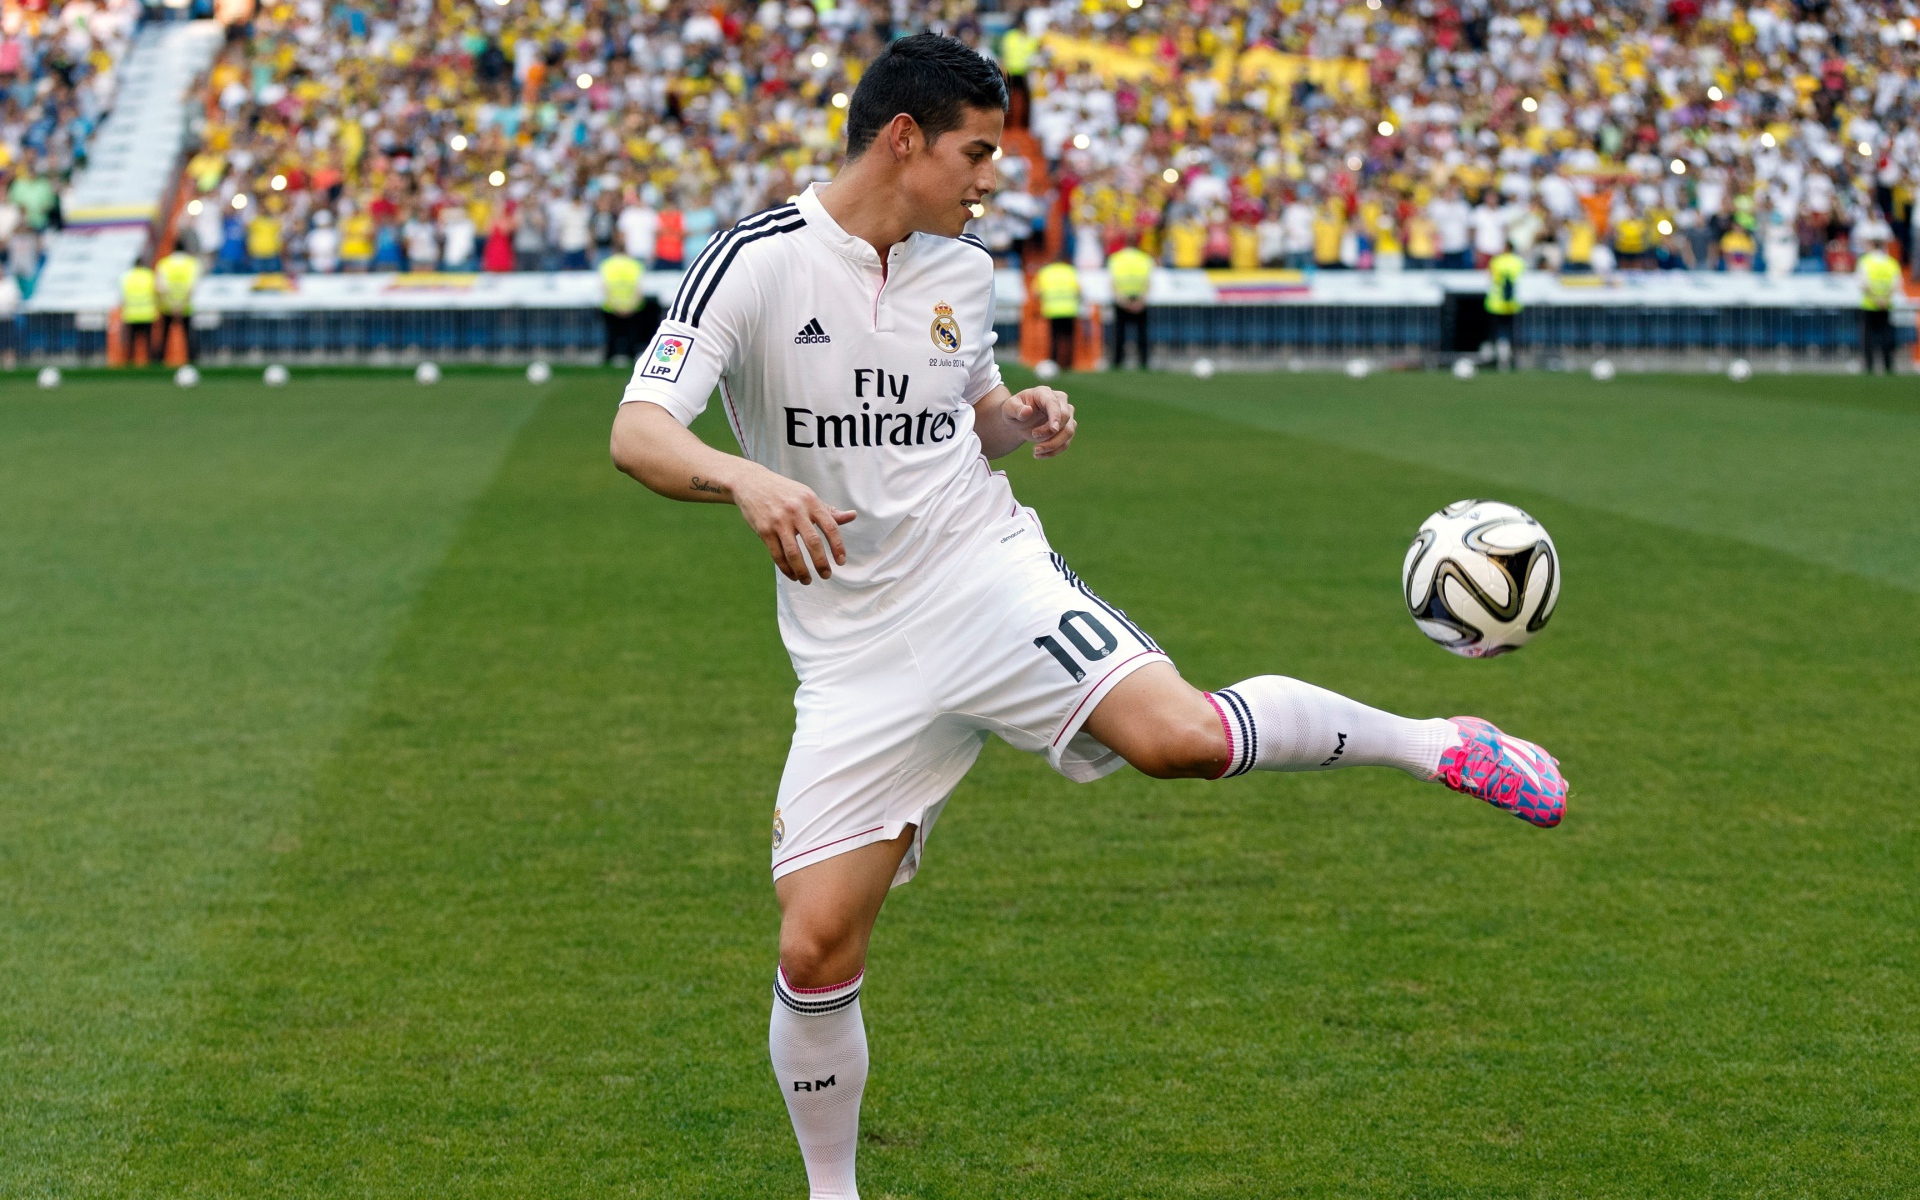 Football player James Rodriguez plays with a ball